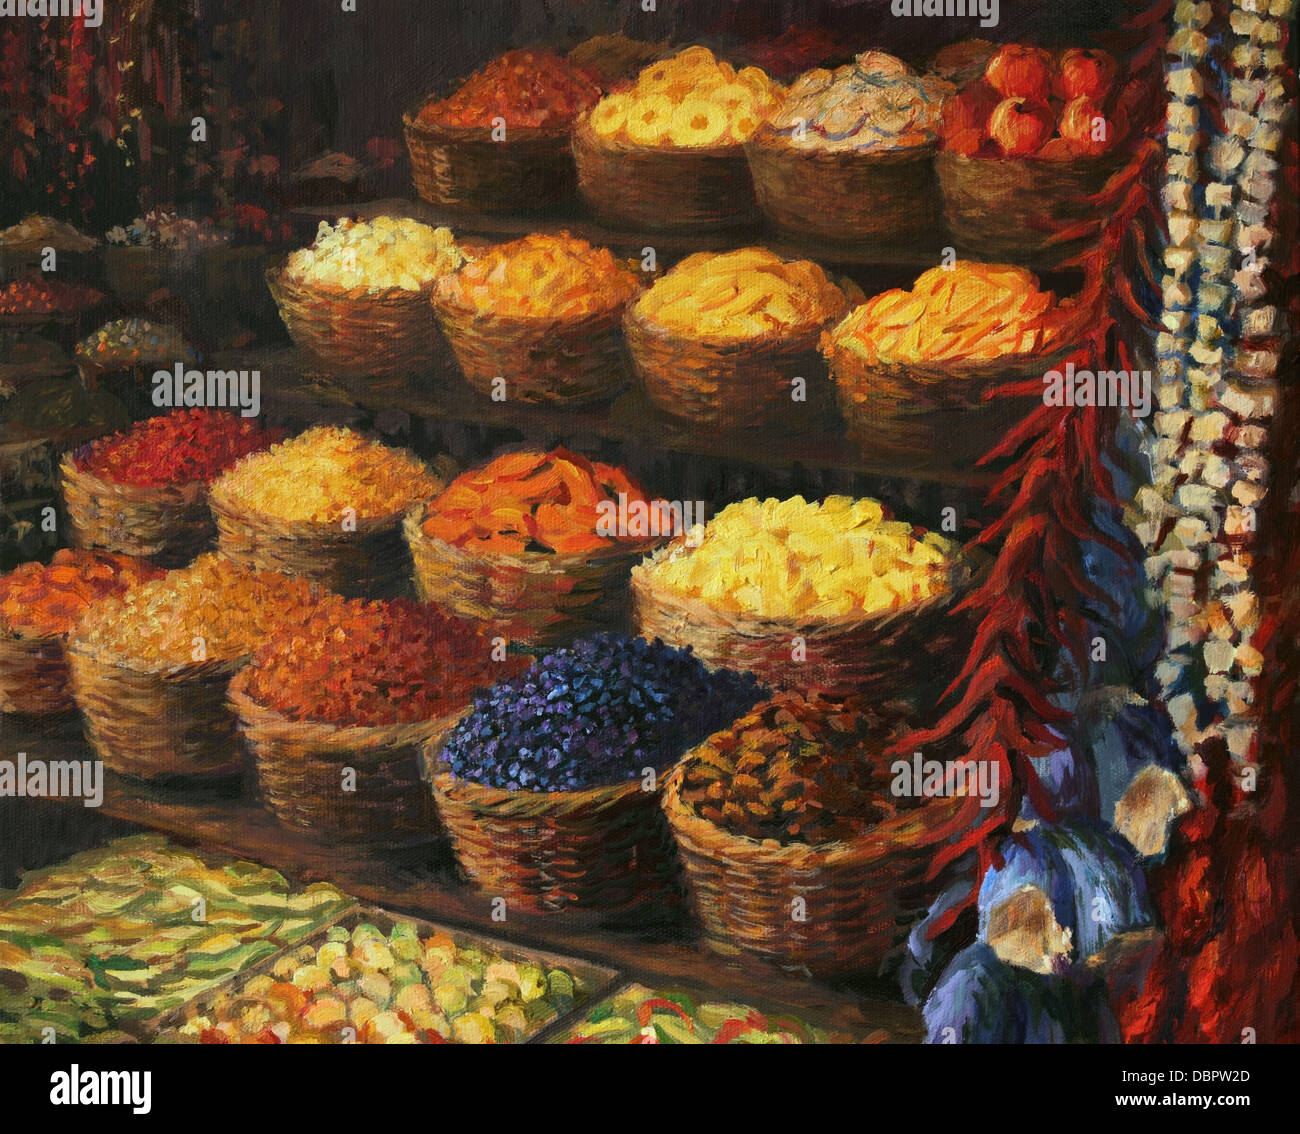 An oil painting on canvas of a colorful market stand in the Orient with fruits, candies, spices and vegetables on display. Stock Photo